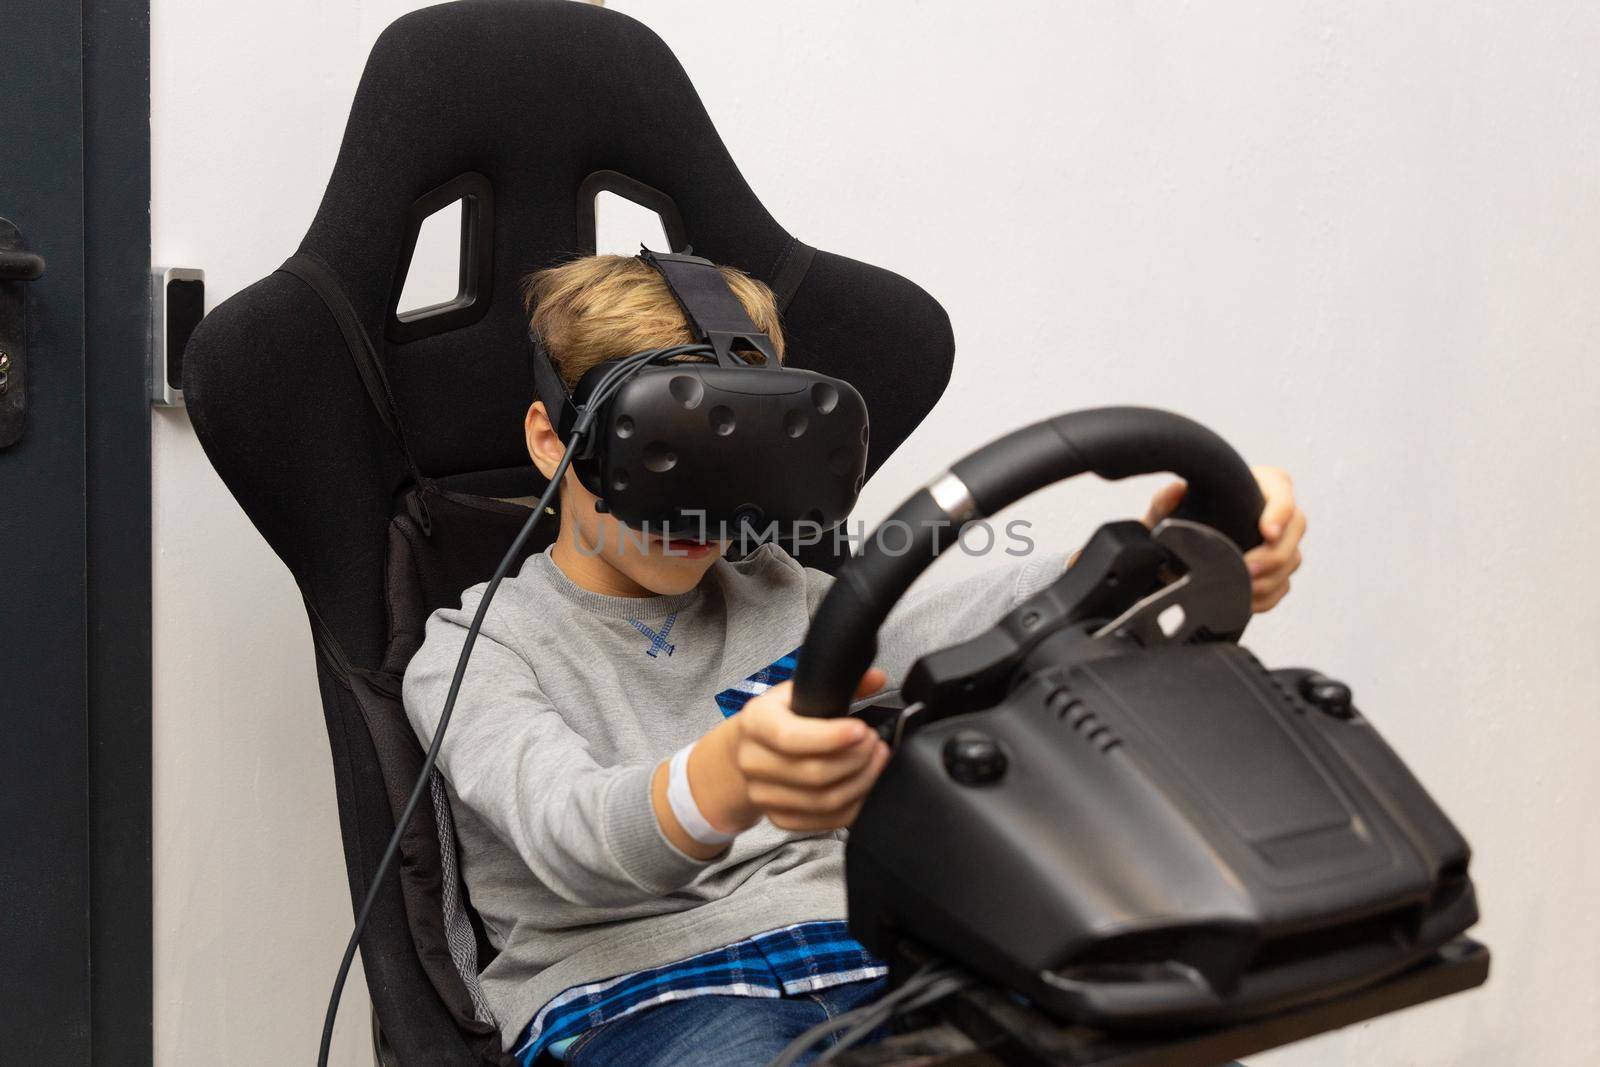 The boy plays on the racing simulator in glasses of a virtual reality on white background. Virtual reality on car simulator